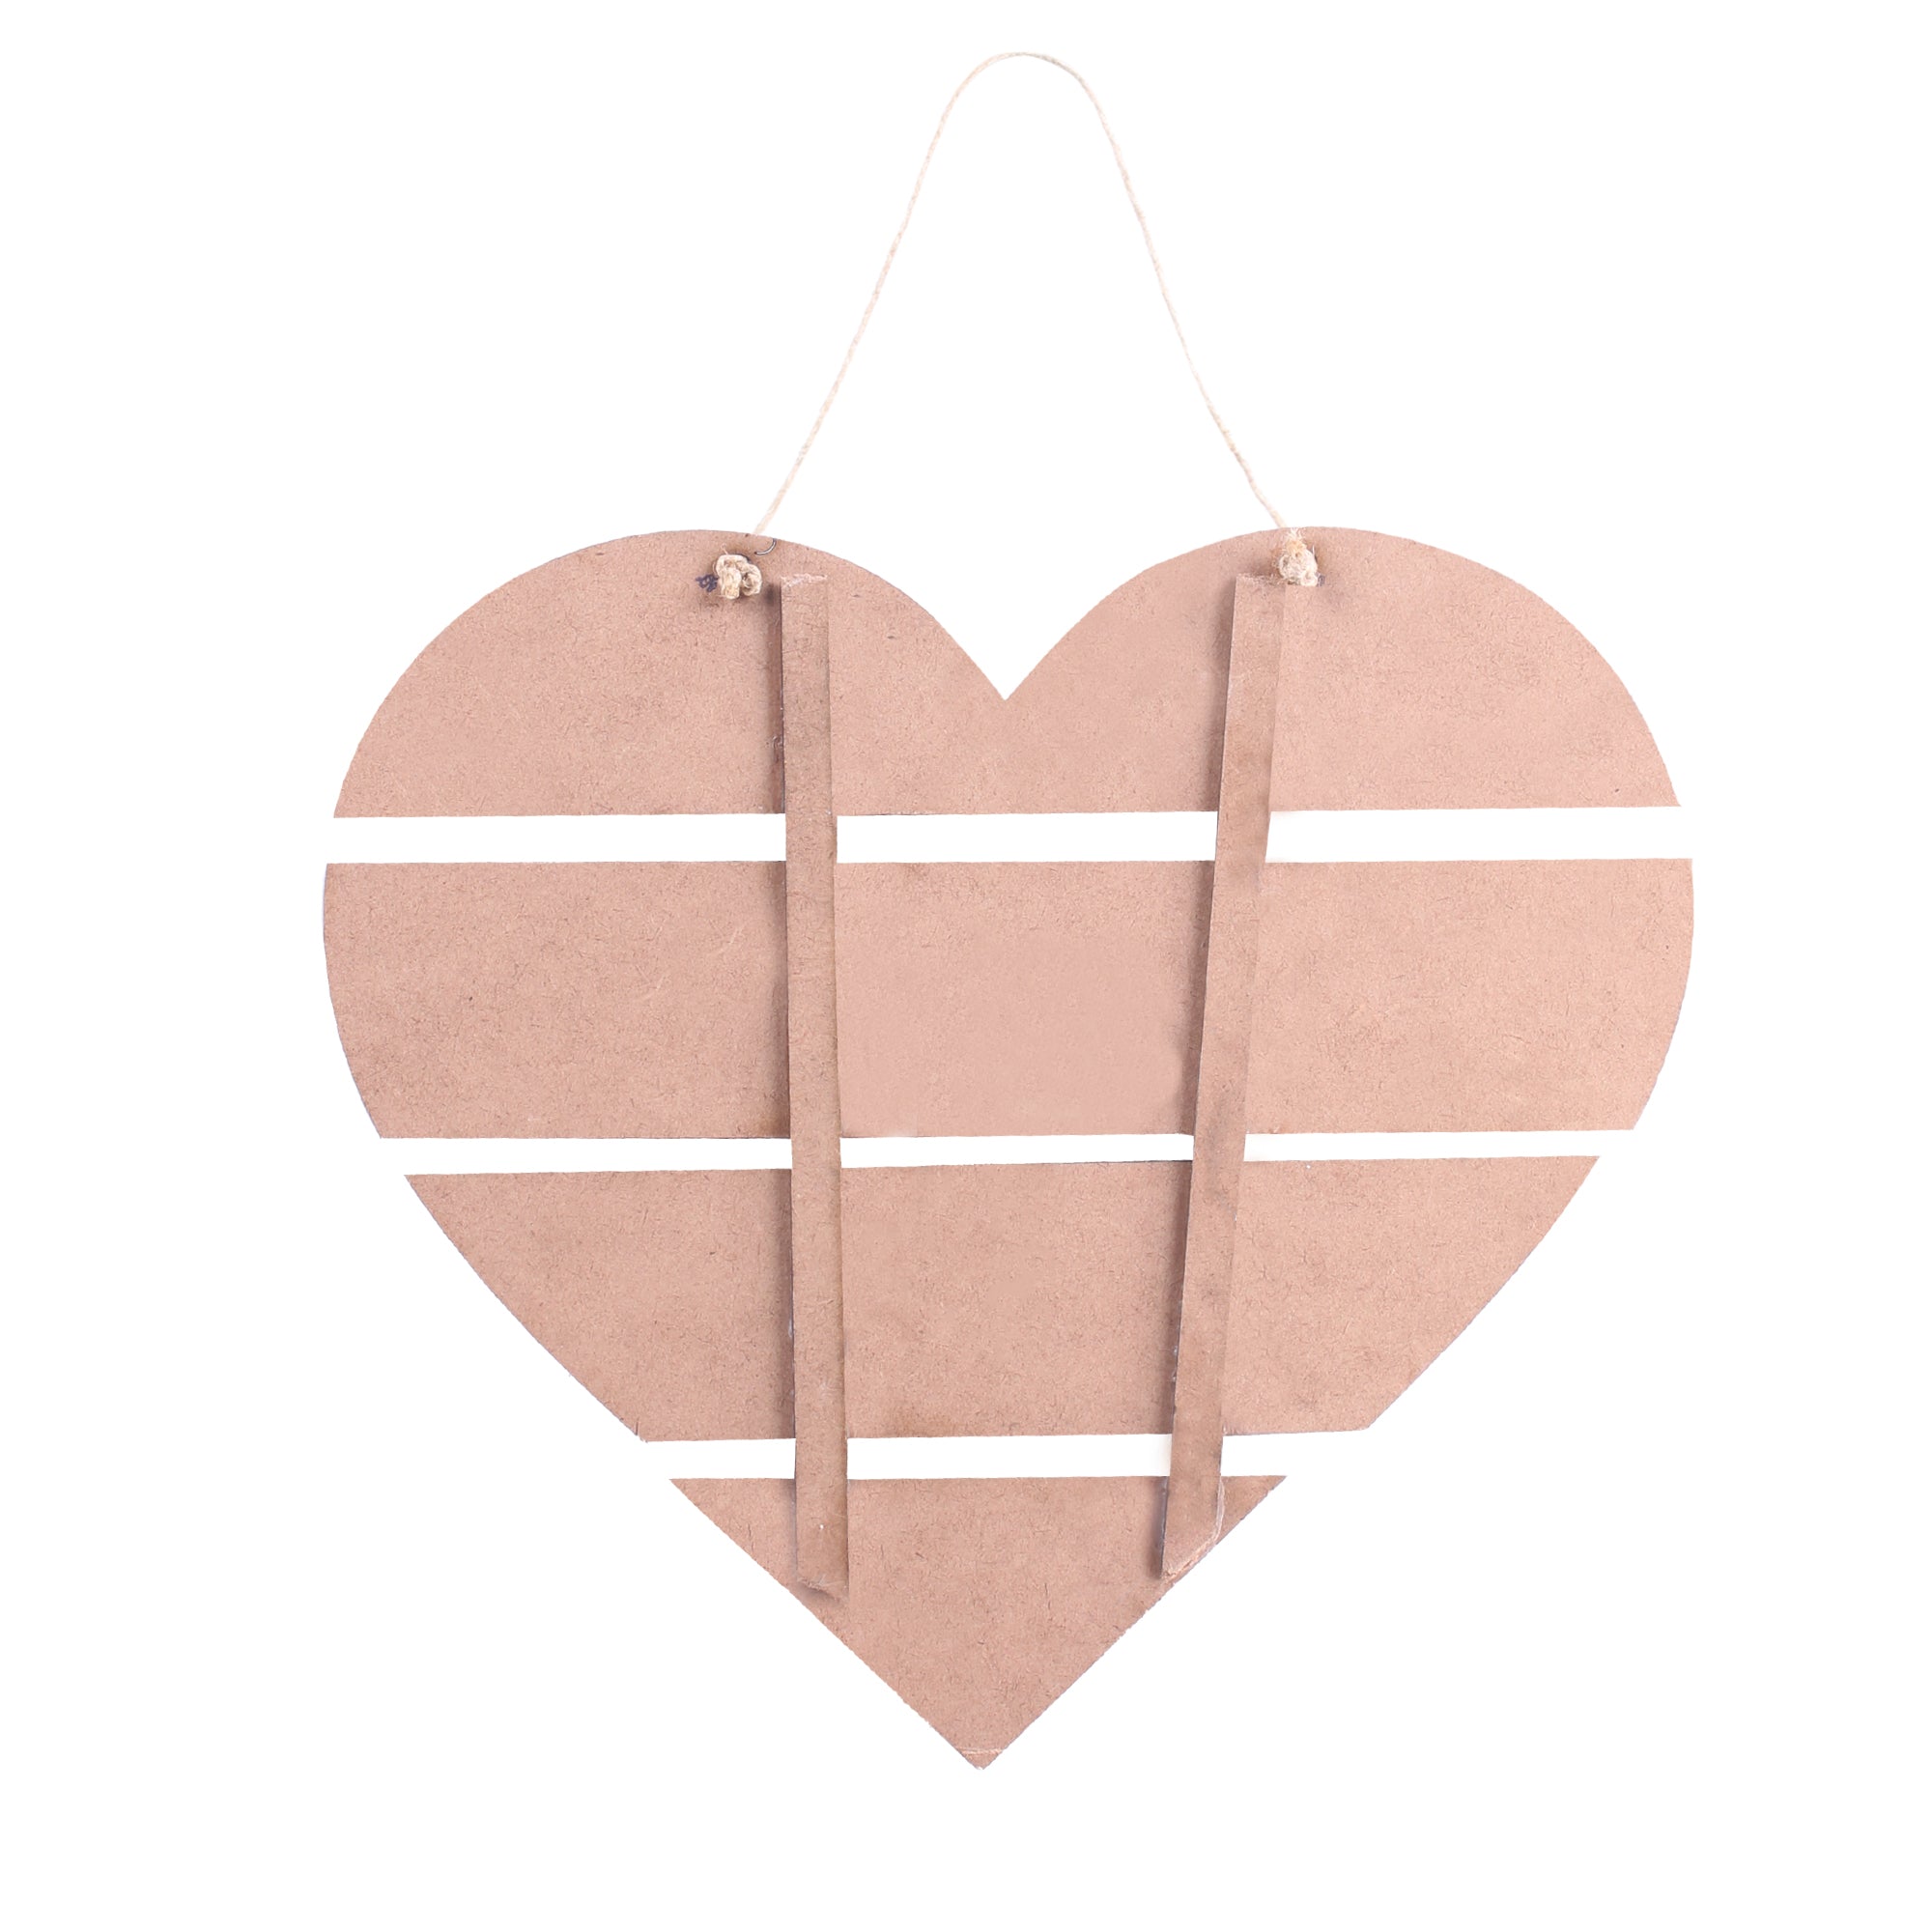 Mdf Slatted Heart 20 X 19.5Cm 2Mm Thick 1Pc Lb